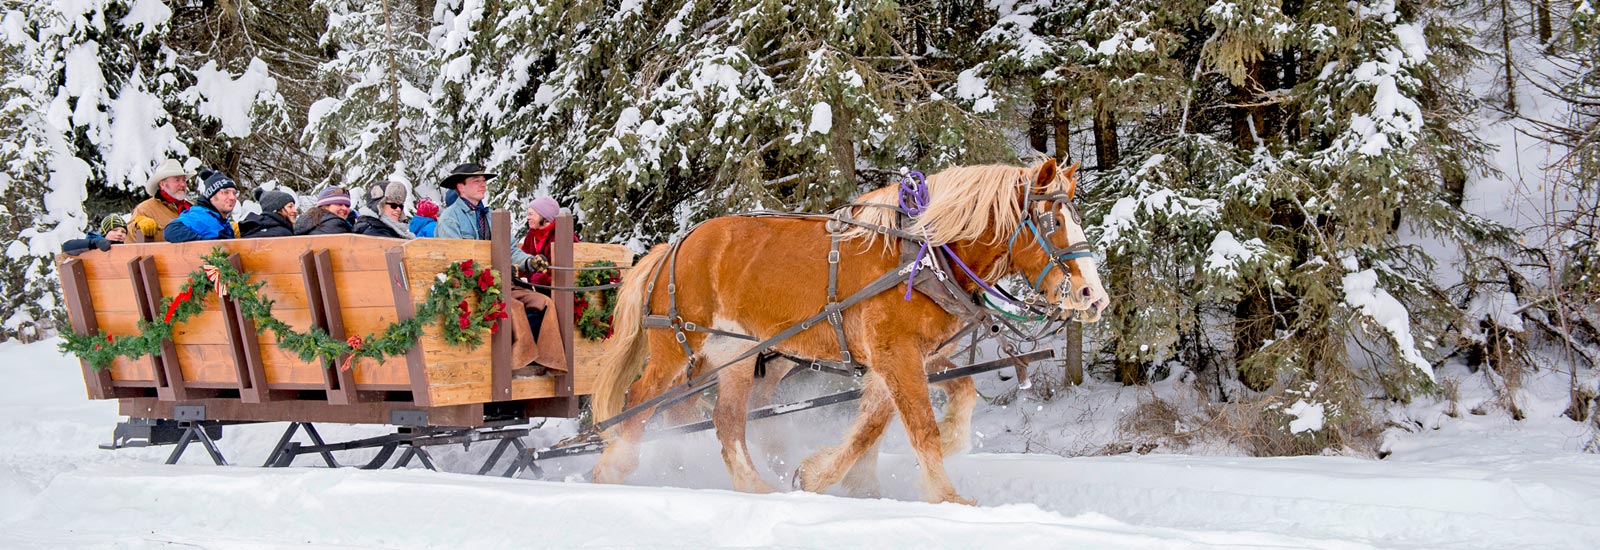 The Bar W Guest Ranch - Whitefish MT - Sleigh Rides